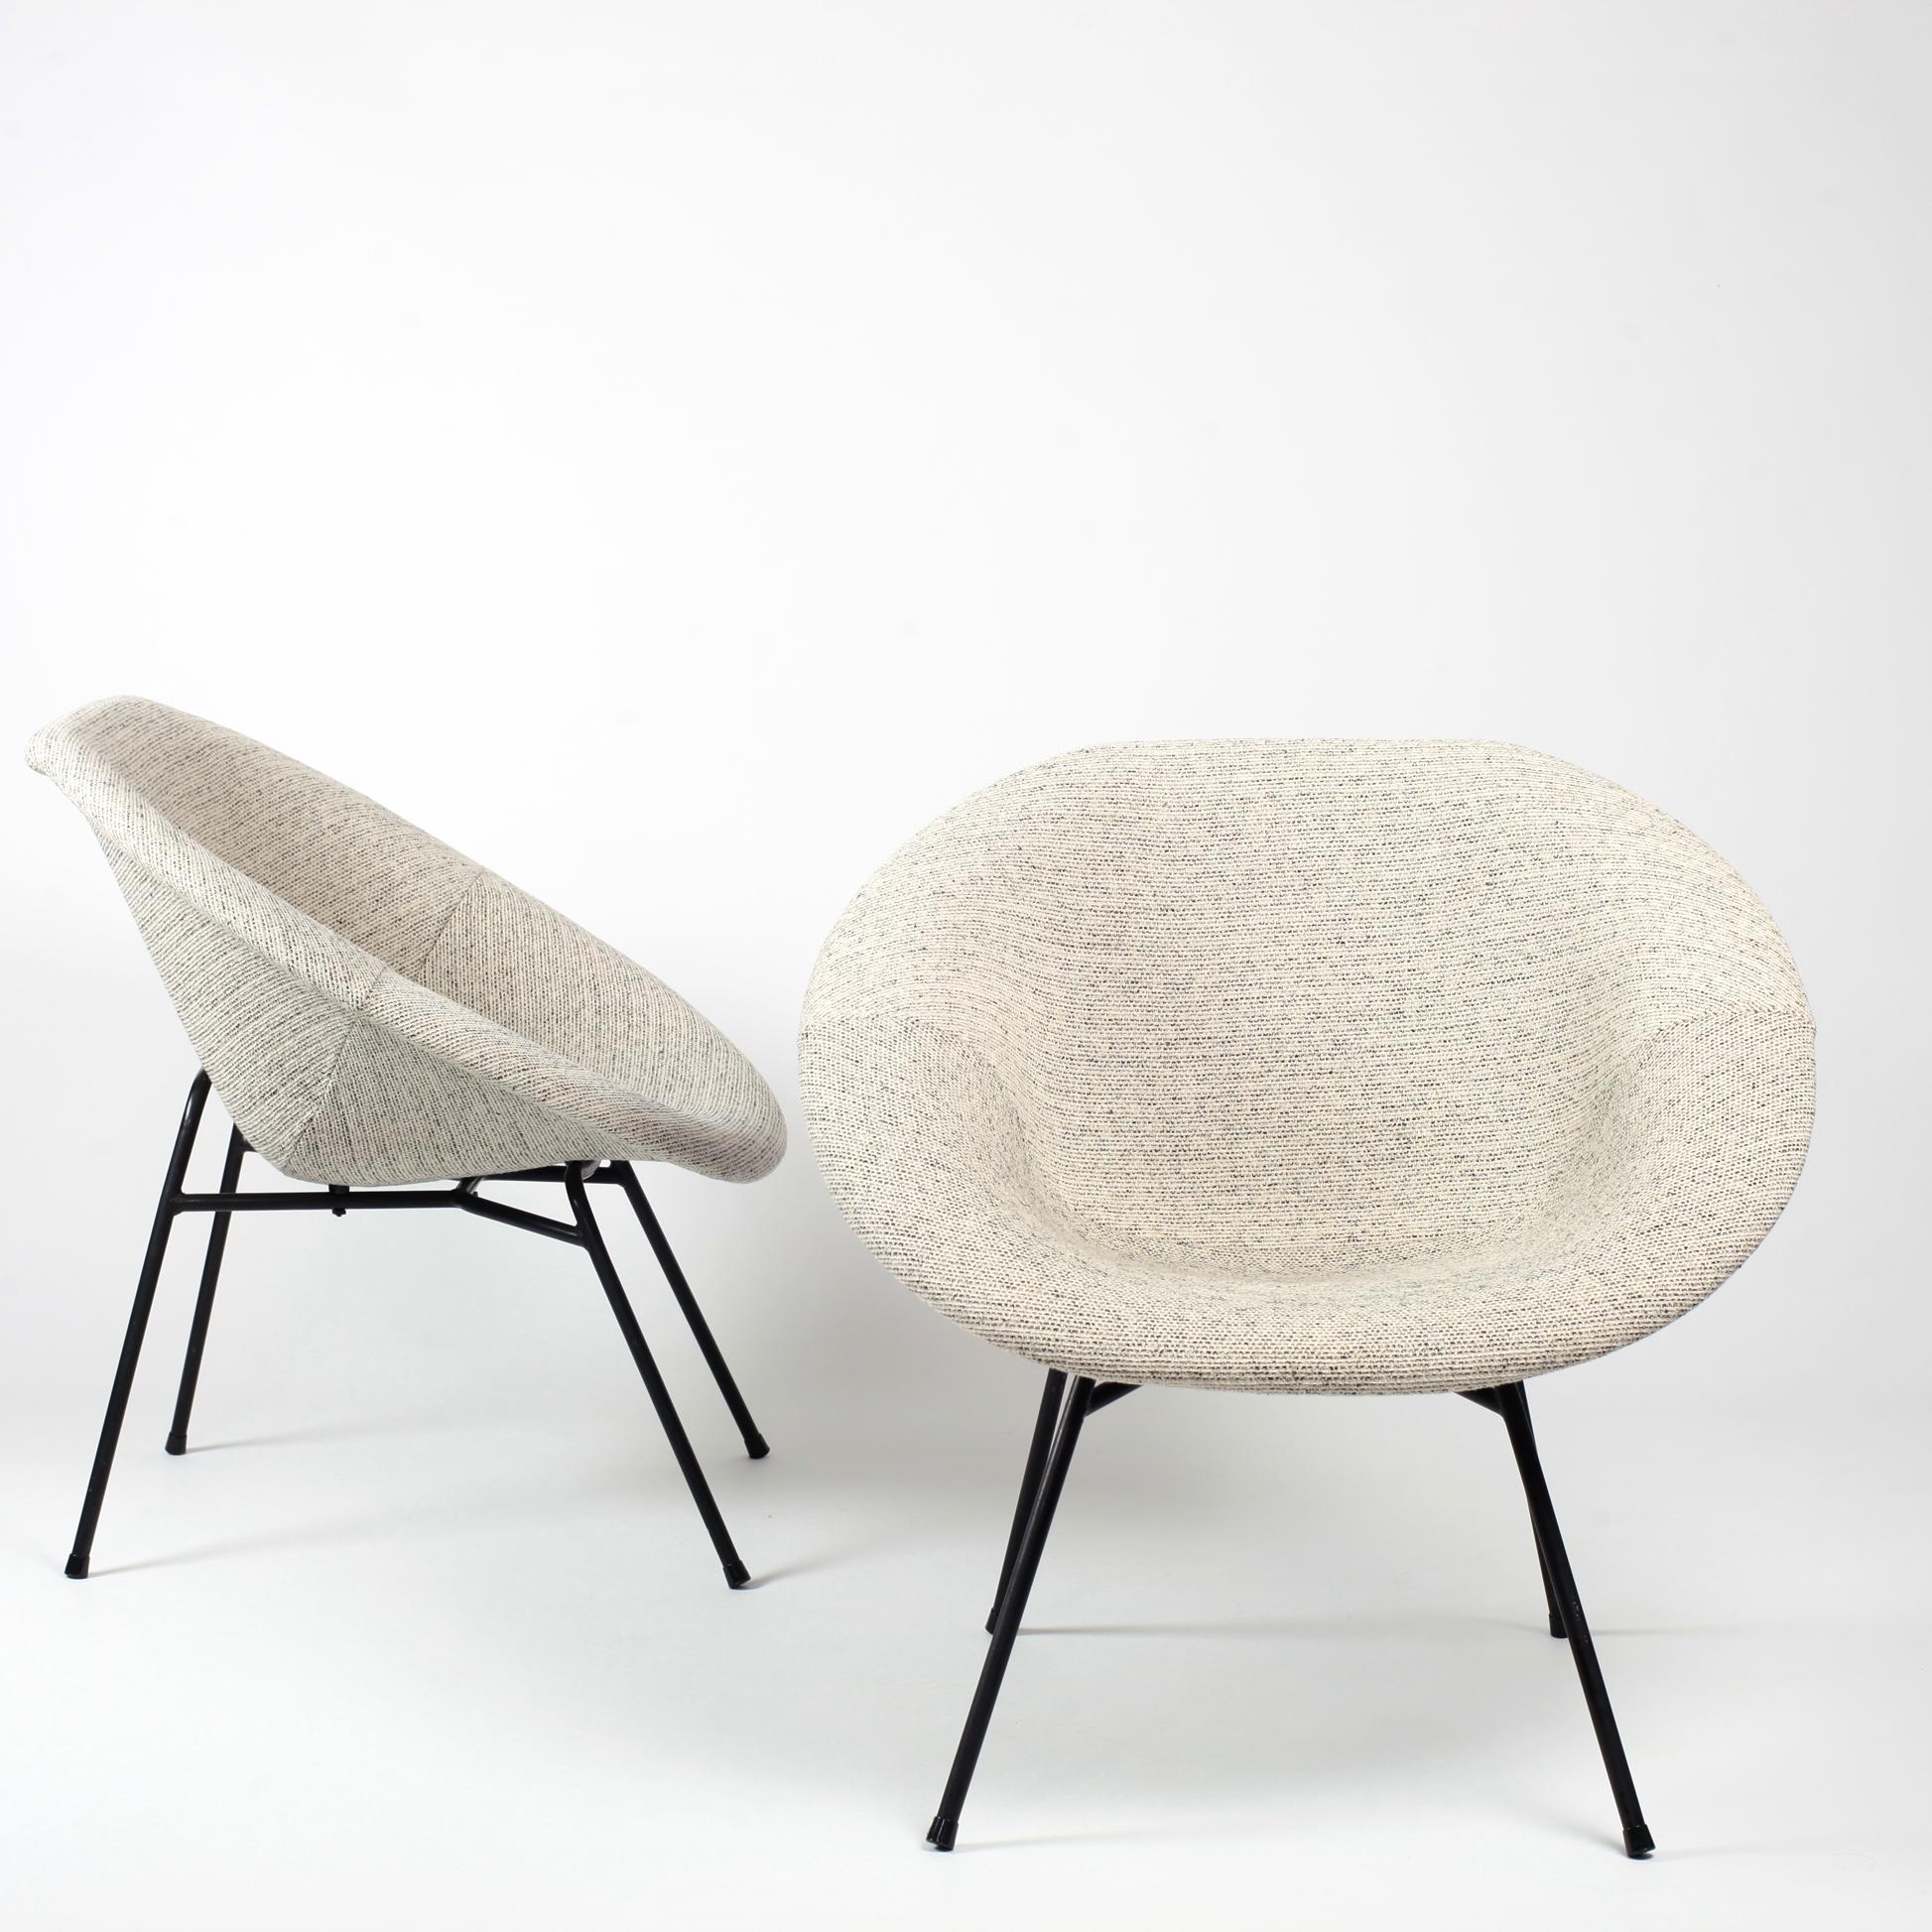 A pair of easy chairs by French designer Claude Vassal for Les Magasins Pilotes.
Black metal legs and lightweight fiberglass shell with new Kvadrat upholstery, late 1950s.
Elegant and comfortable.